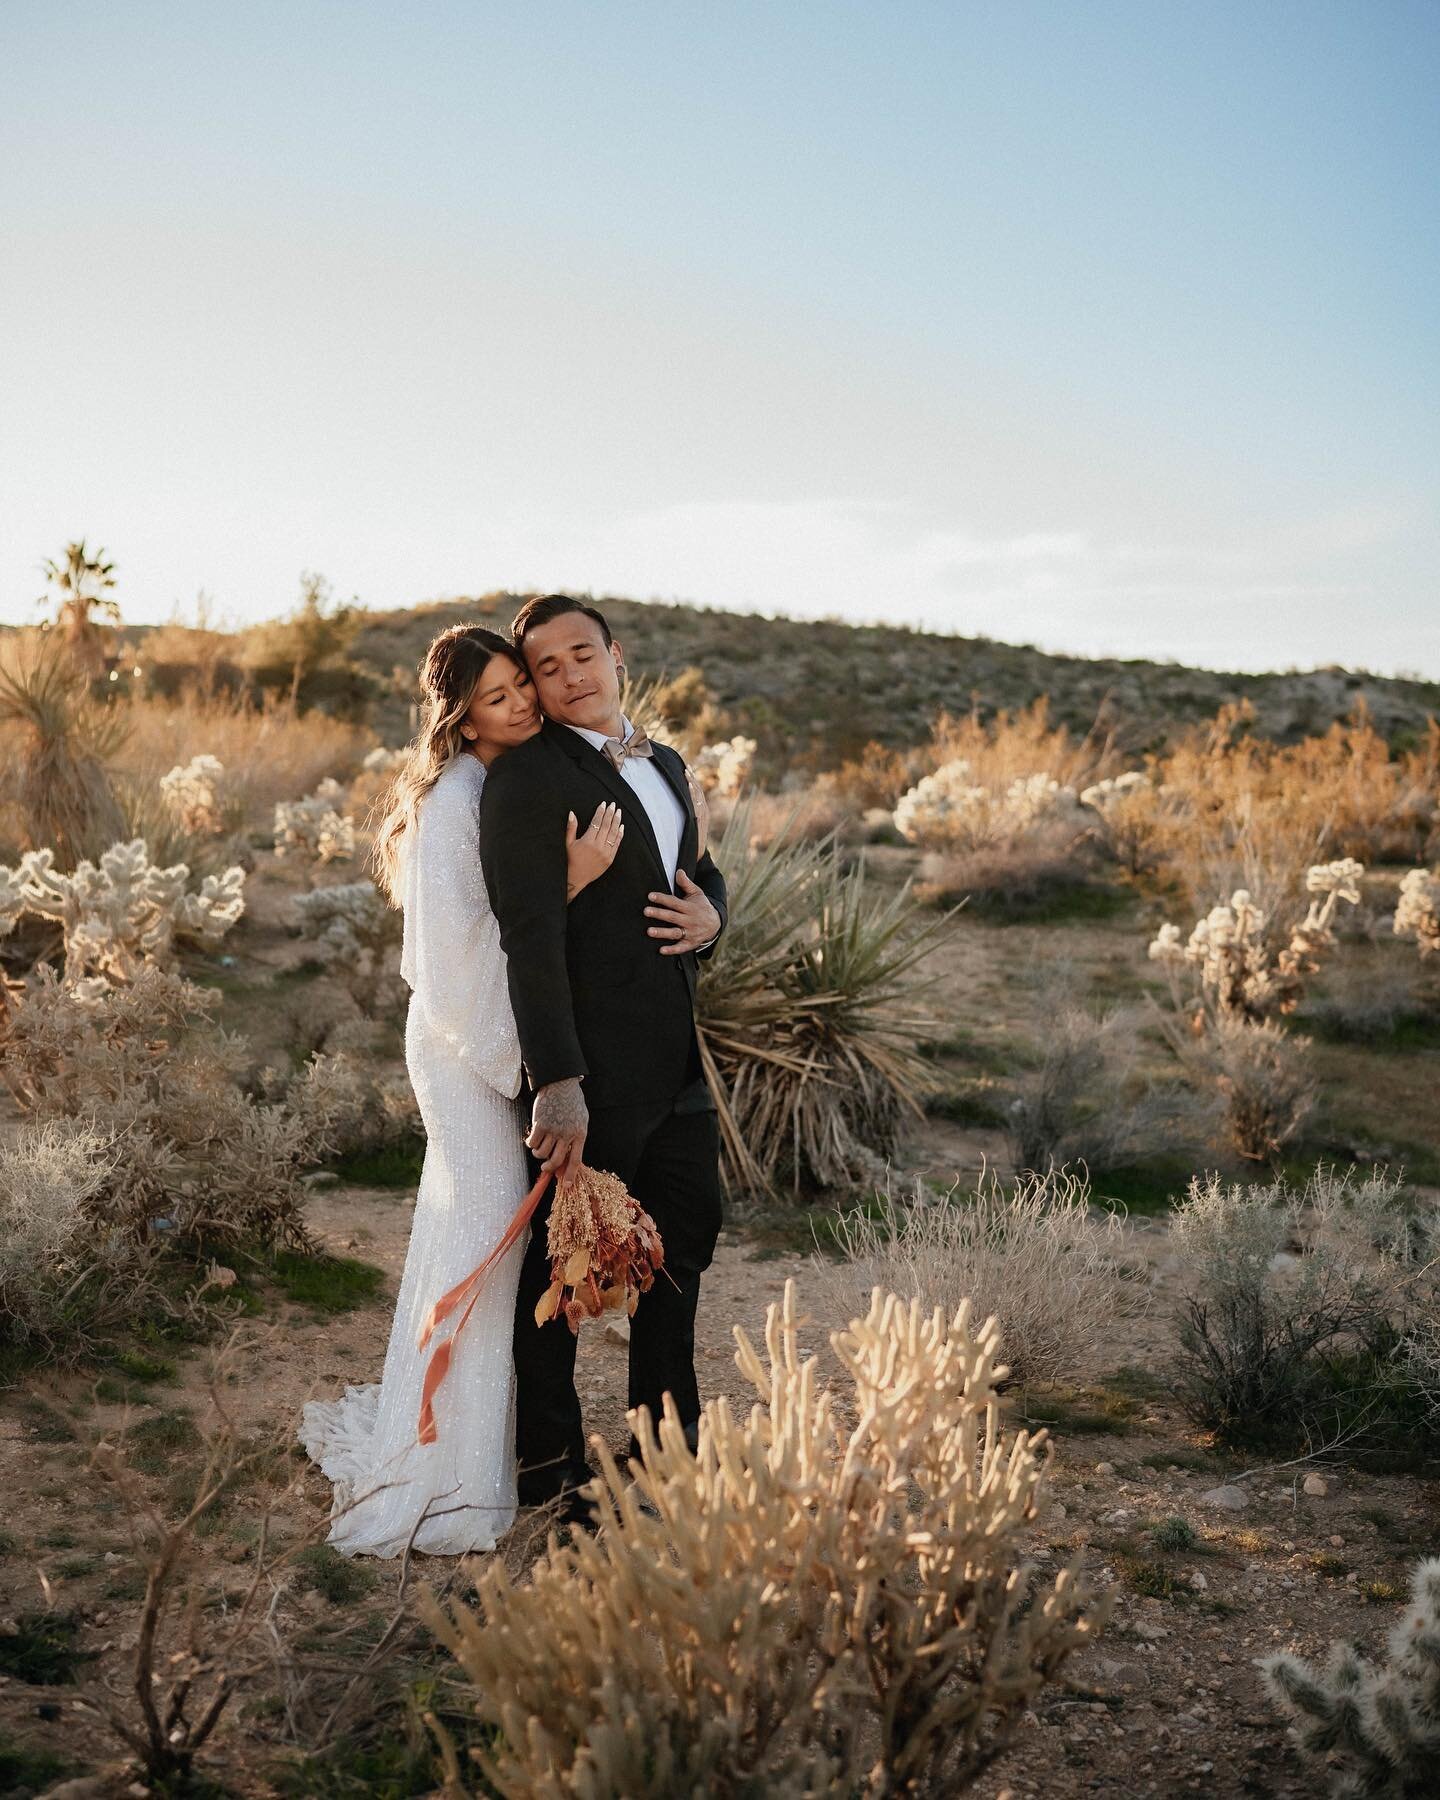 Dreaming of the day I get to go back to Joshua Tree for another elopement 😍

#yegphotographer #yegphotography #yegwedding #edmontonwedding #edmontonweddingphotographer #albertawedding #albertaweddingphotographer #travelphotography #travelingphotogra